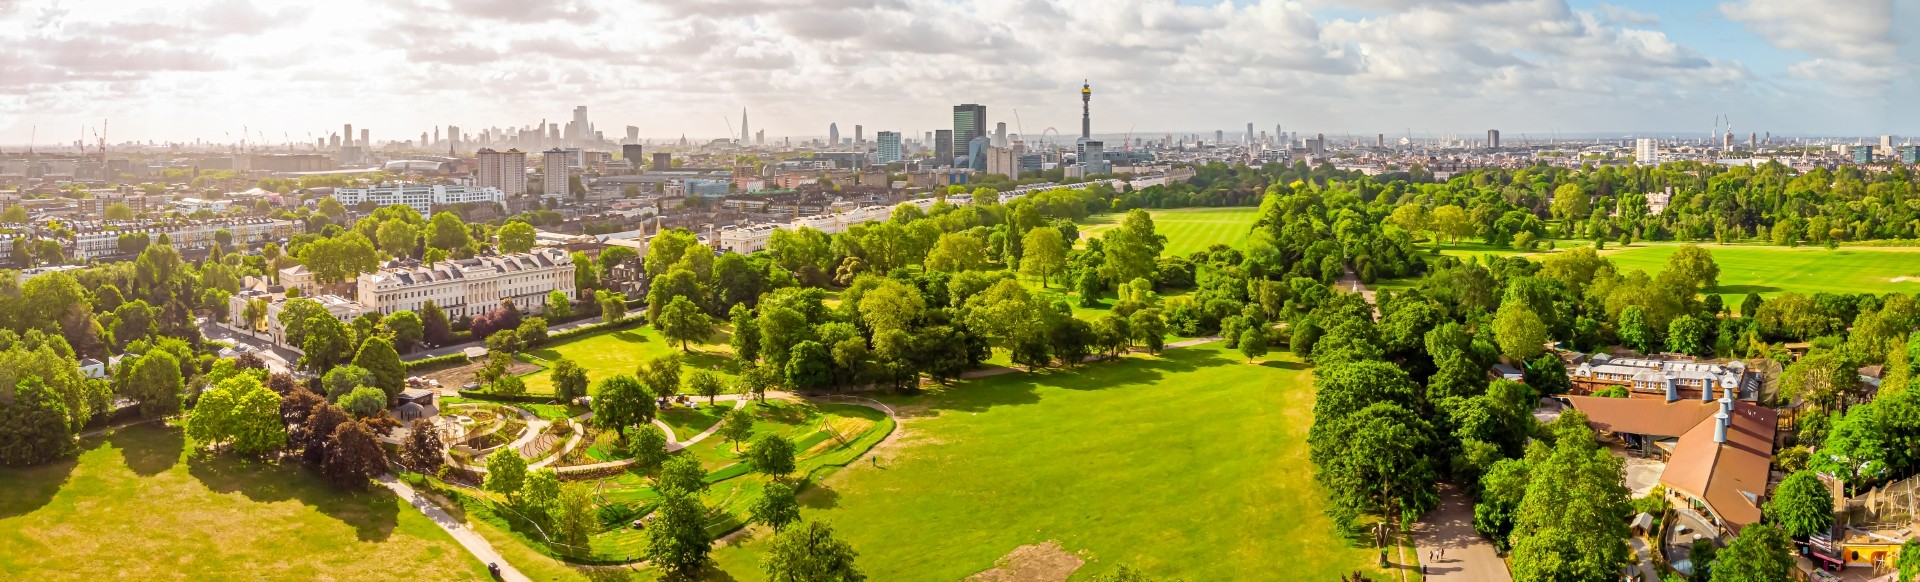 A daytime aerial view of Regent's Park with the skyline of London in the background